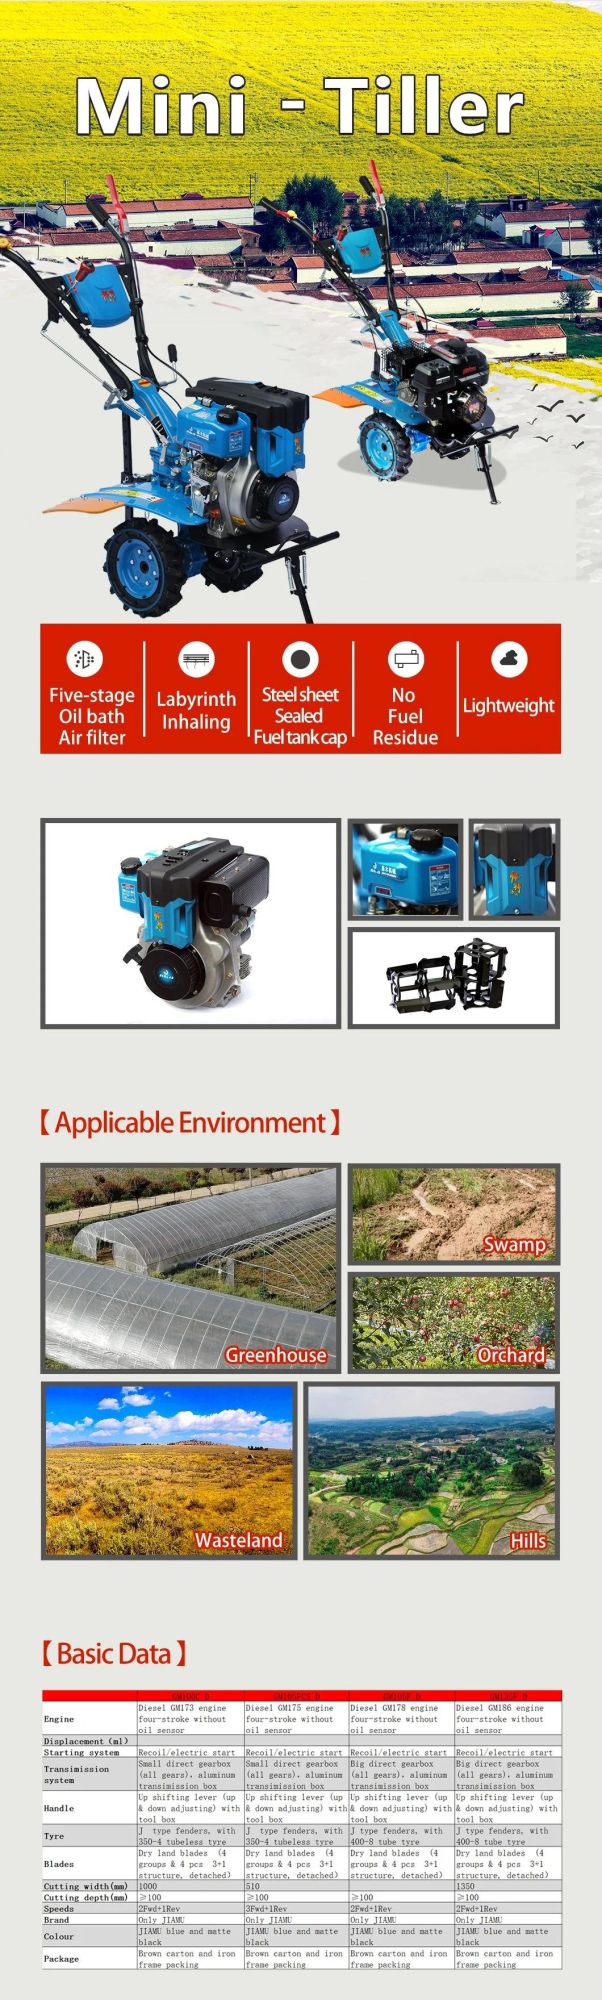 Jiamu GM135f D with GM186 All Gear Aluminum transmission Box Agricultural Machinery Diesel D-Style Mini Power Tiller Hot Sale